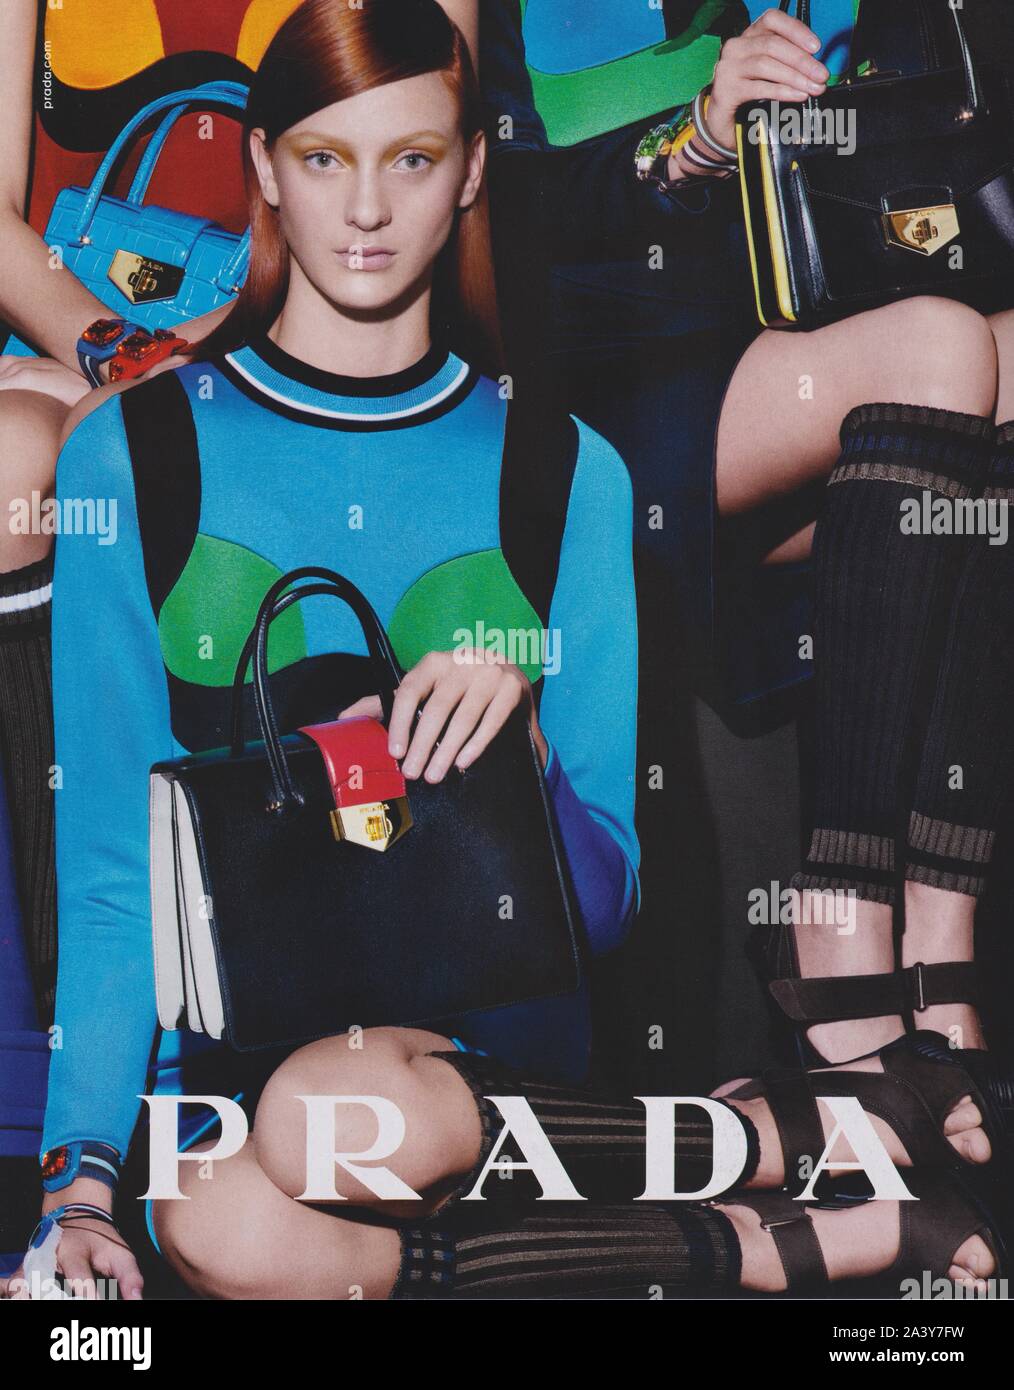 poster advertising PRADA fashion house in paper magazine from 2014 year,  advertisement, creative PRADA advert from 2010s Stock Photo - Alamy